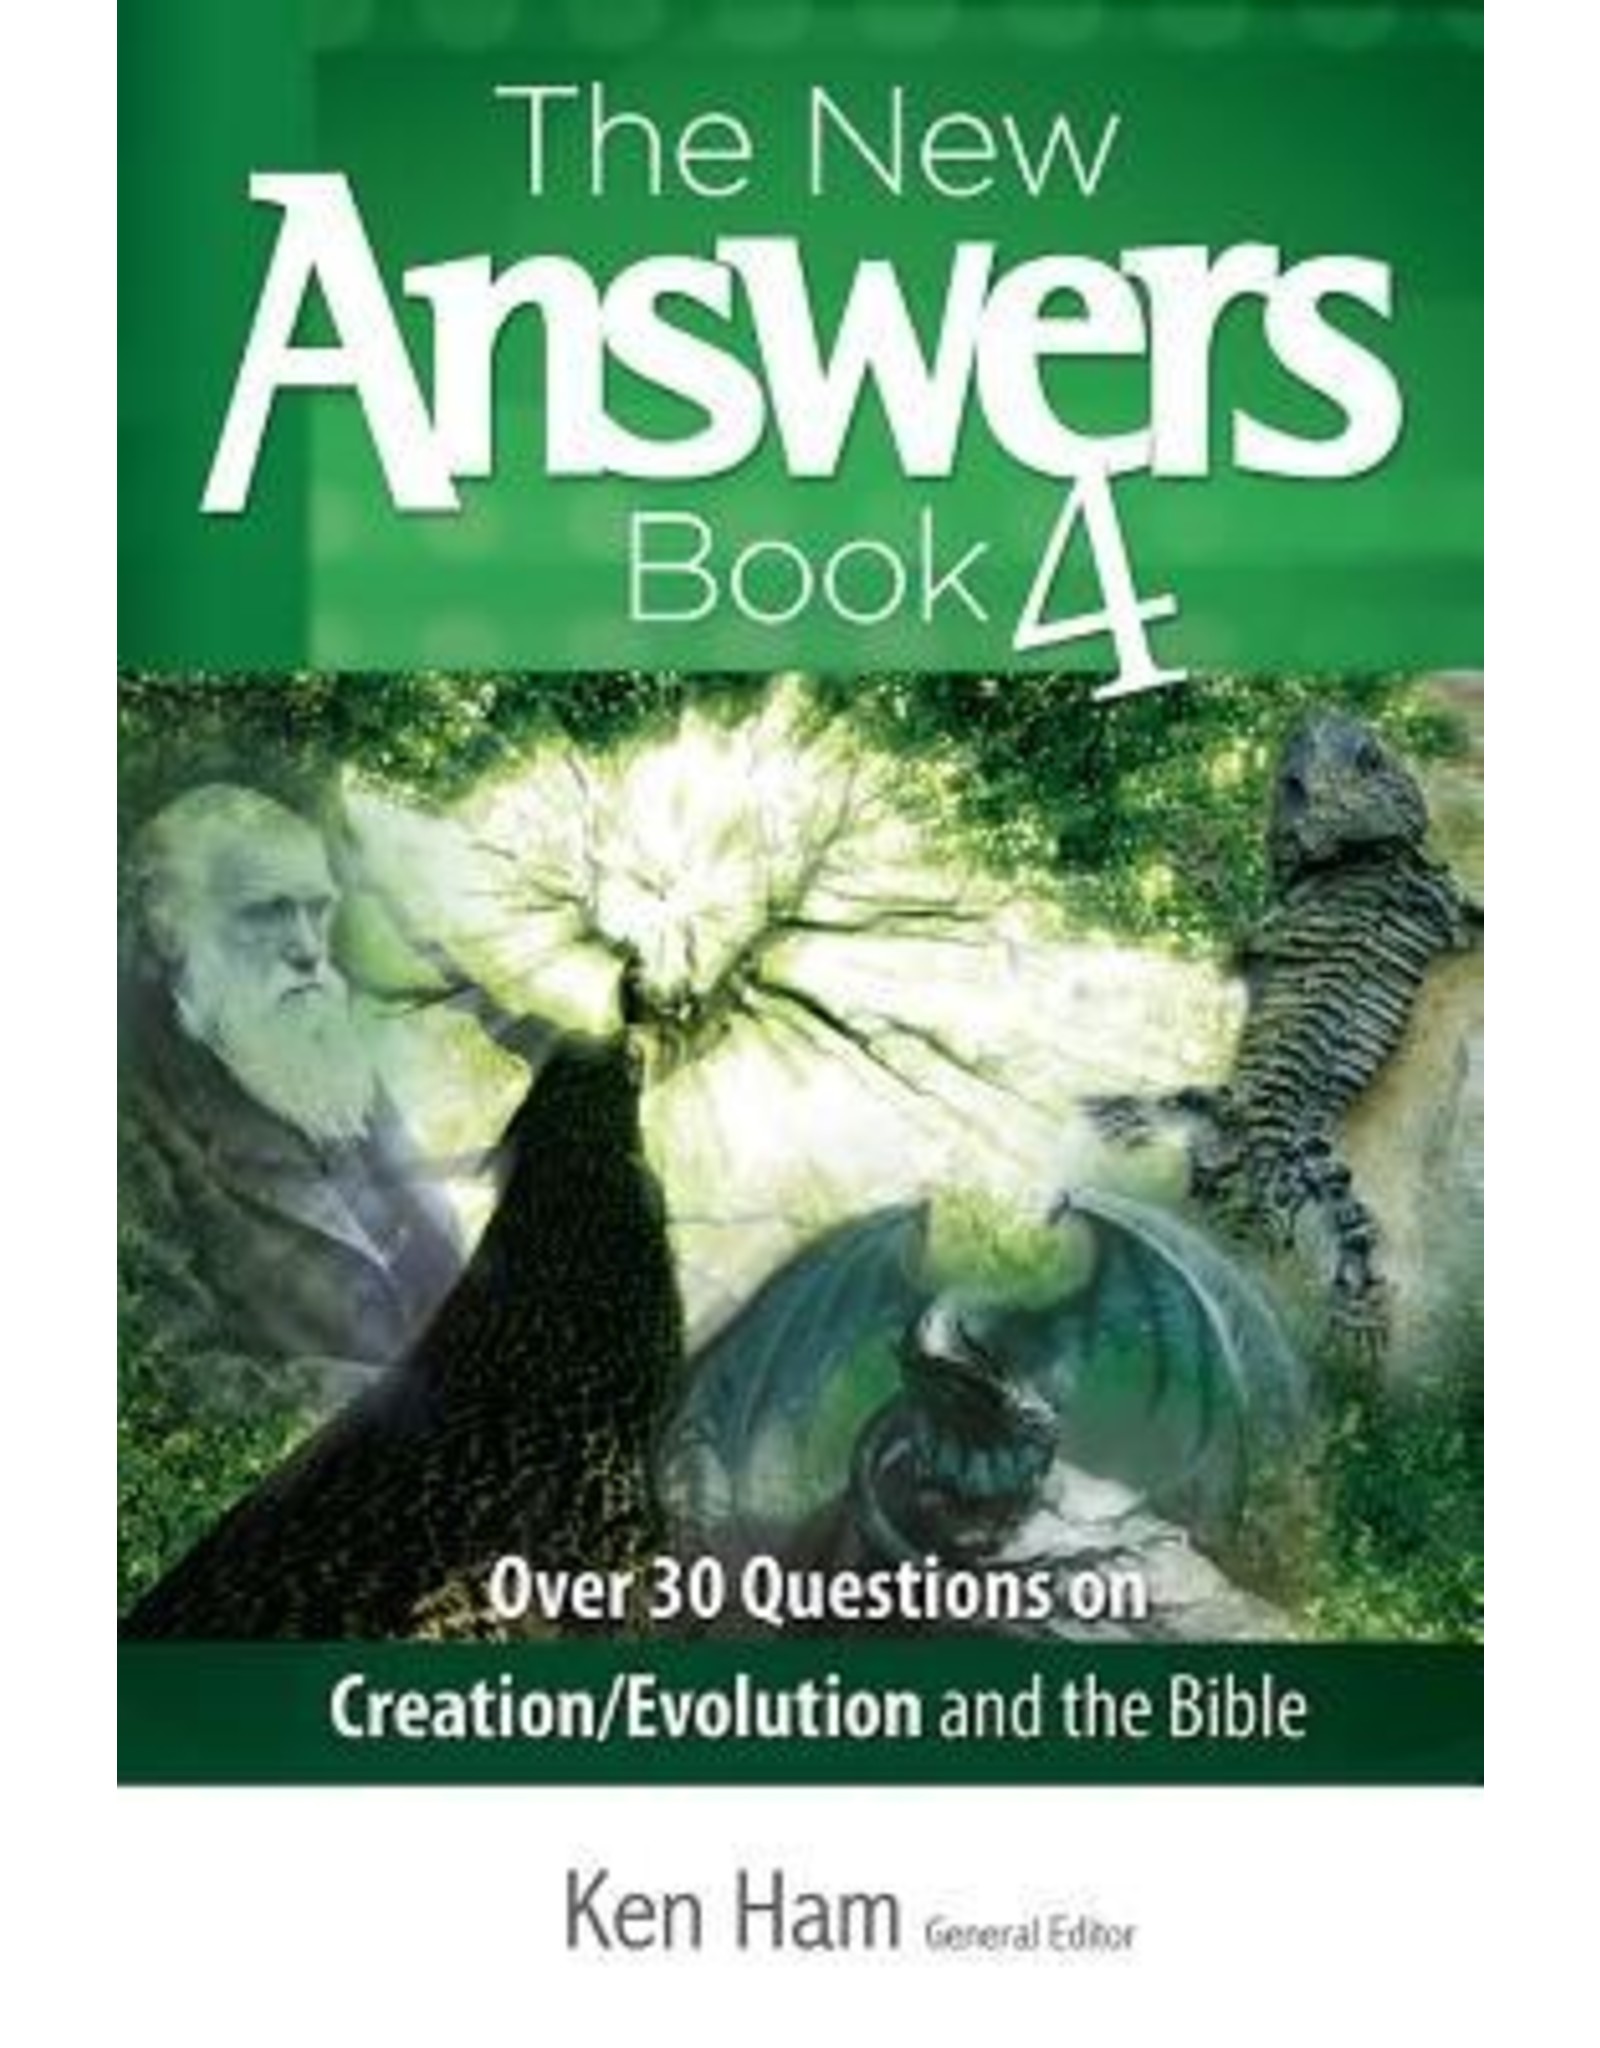 Ken Ham The New Answers Book 4